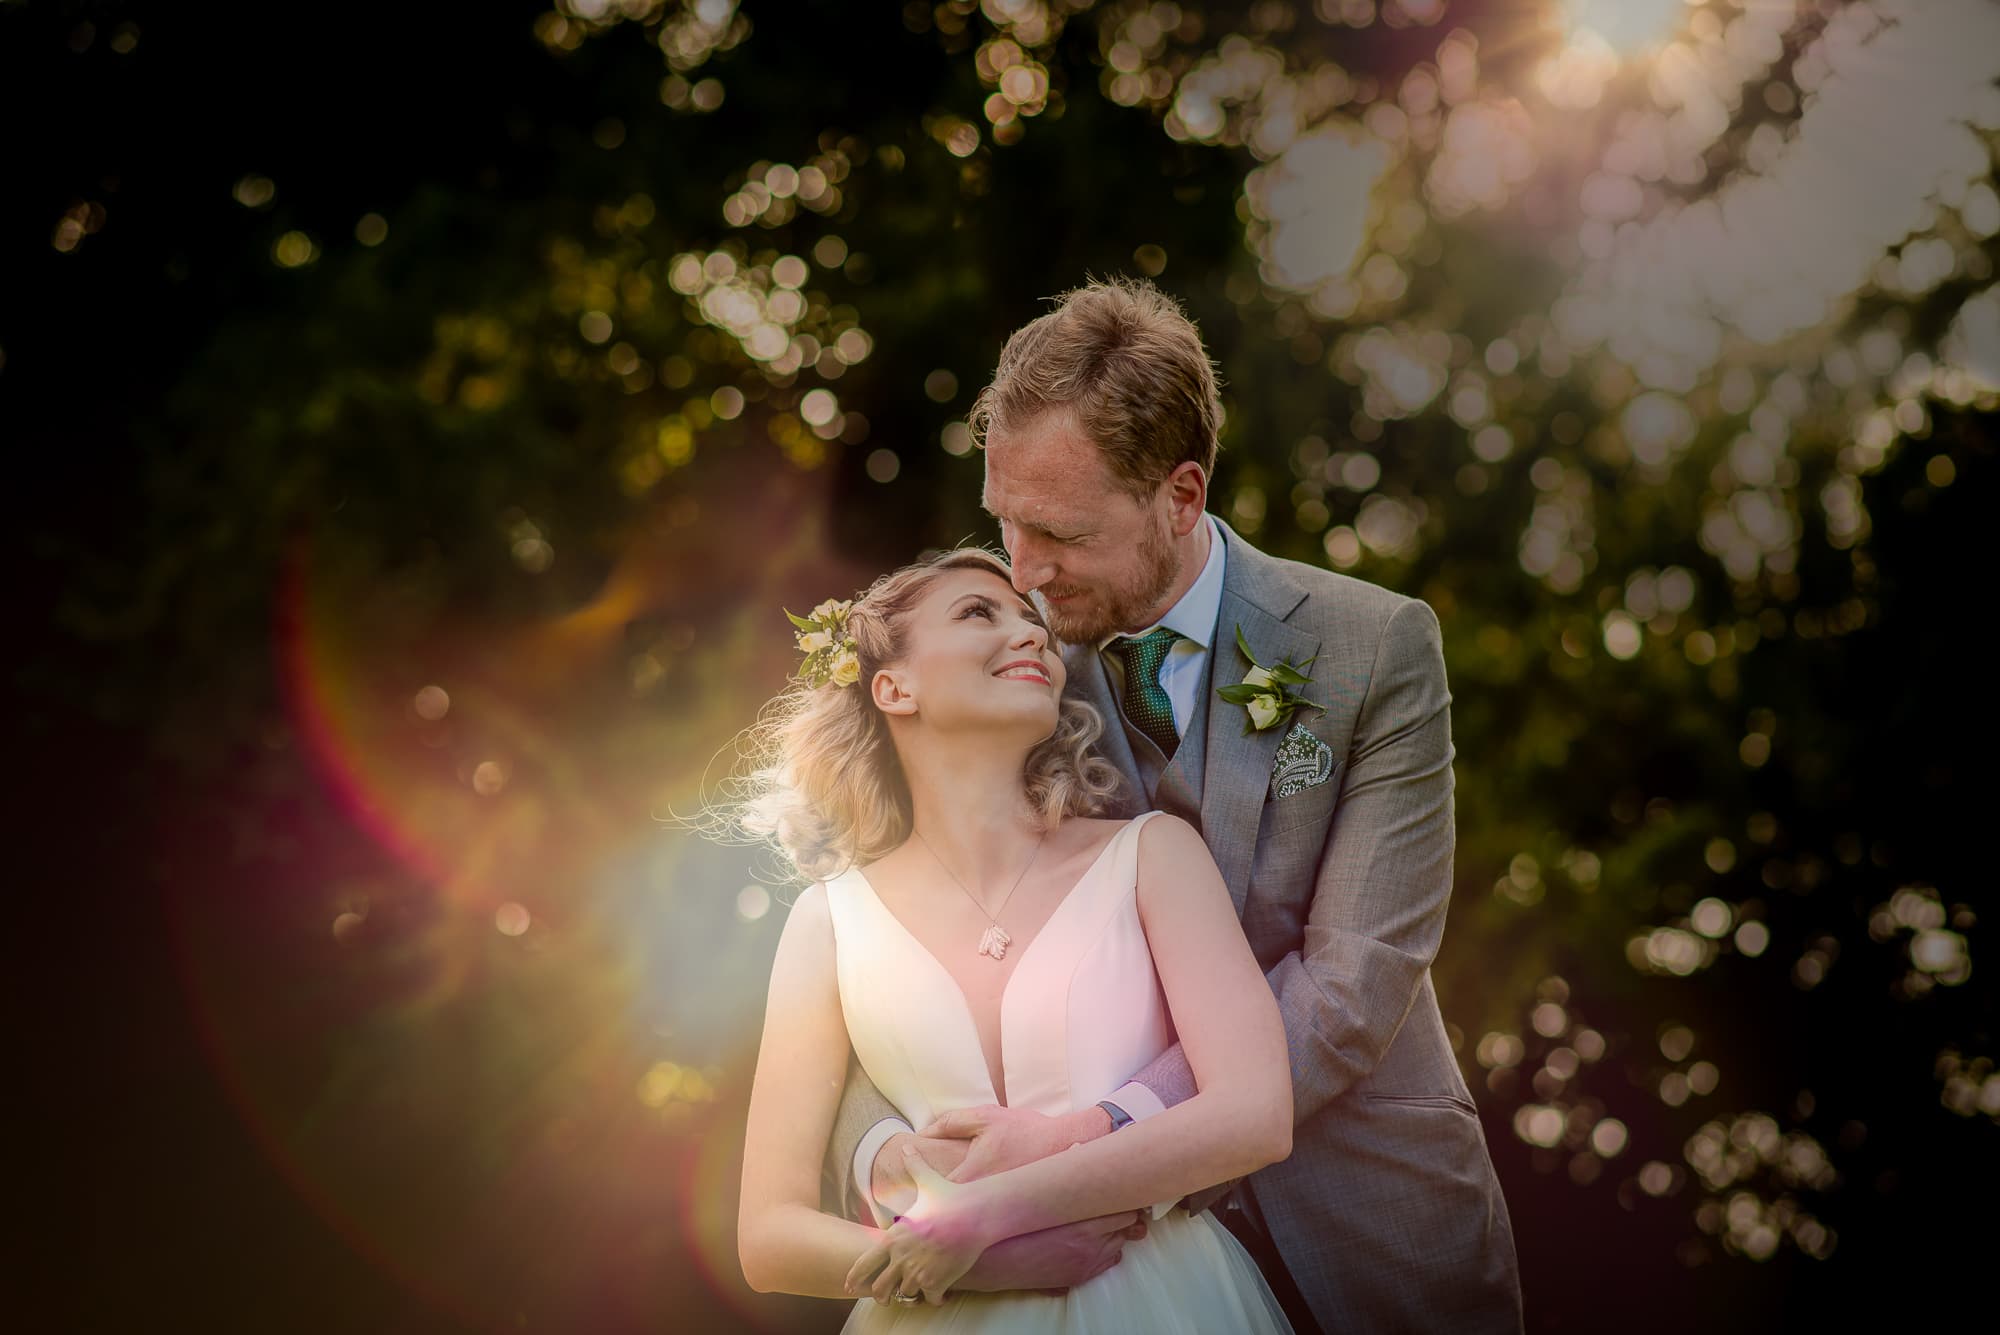 A Golden hour portrait of the bride and groom during wedding at Holmewood Hall Wedding Venue in Cambridgeshire